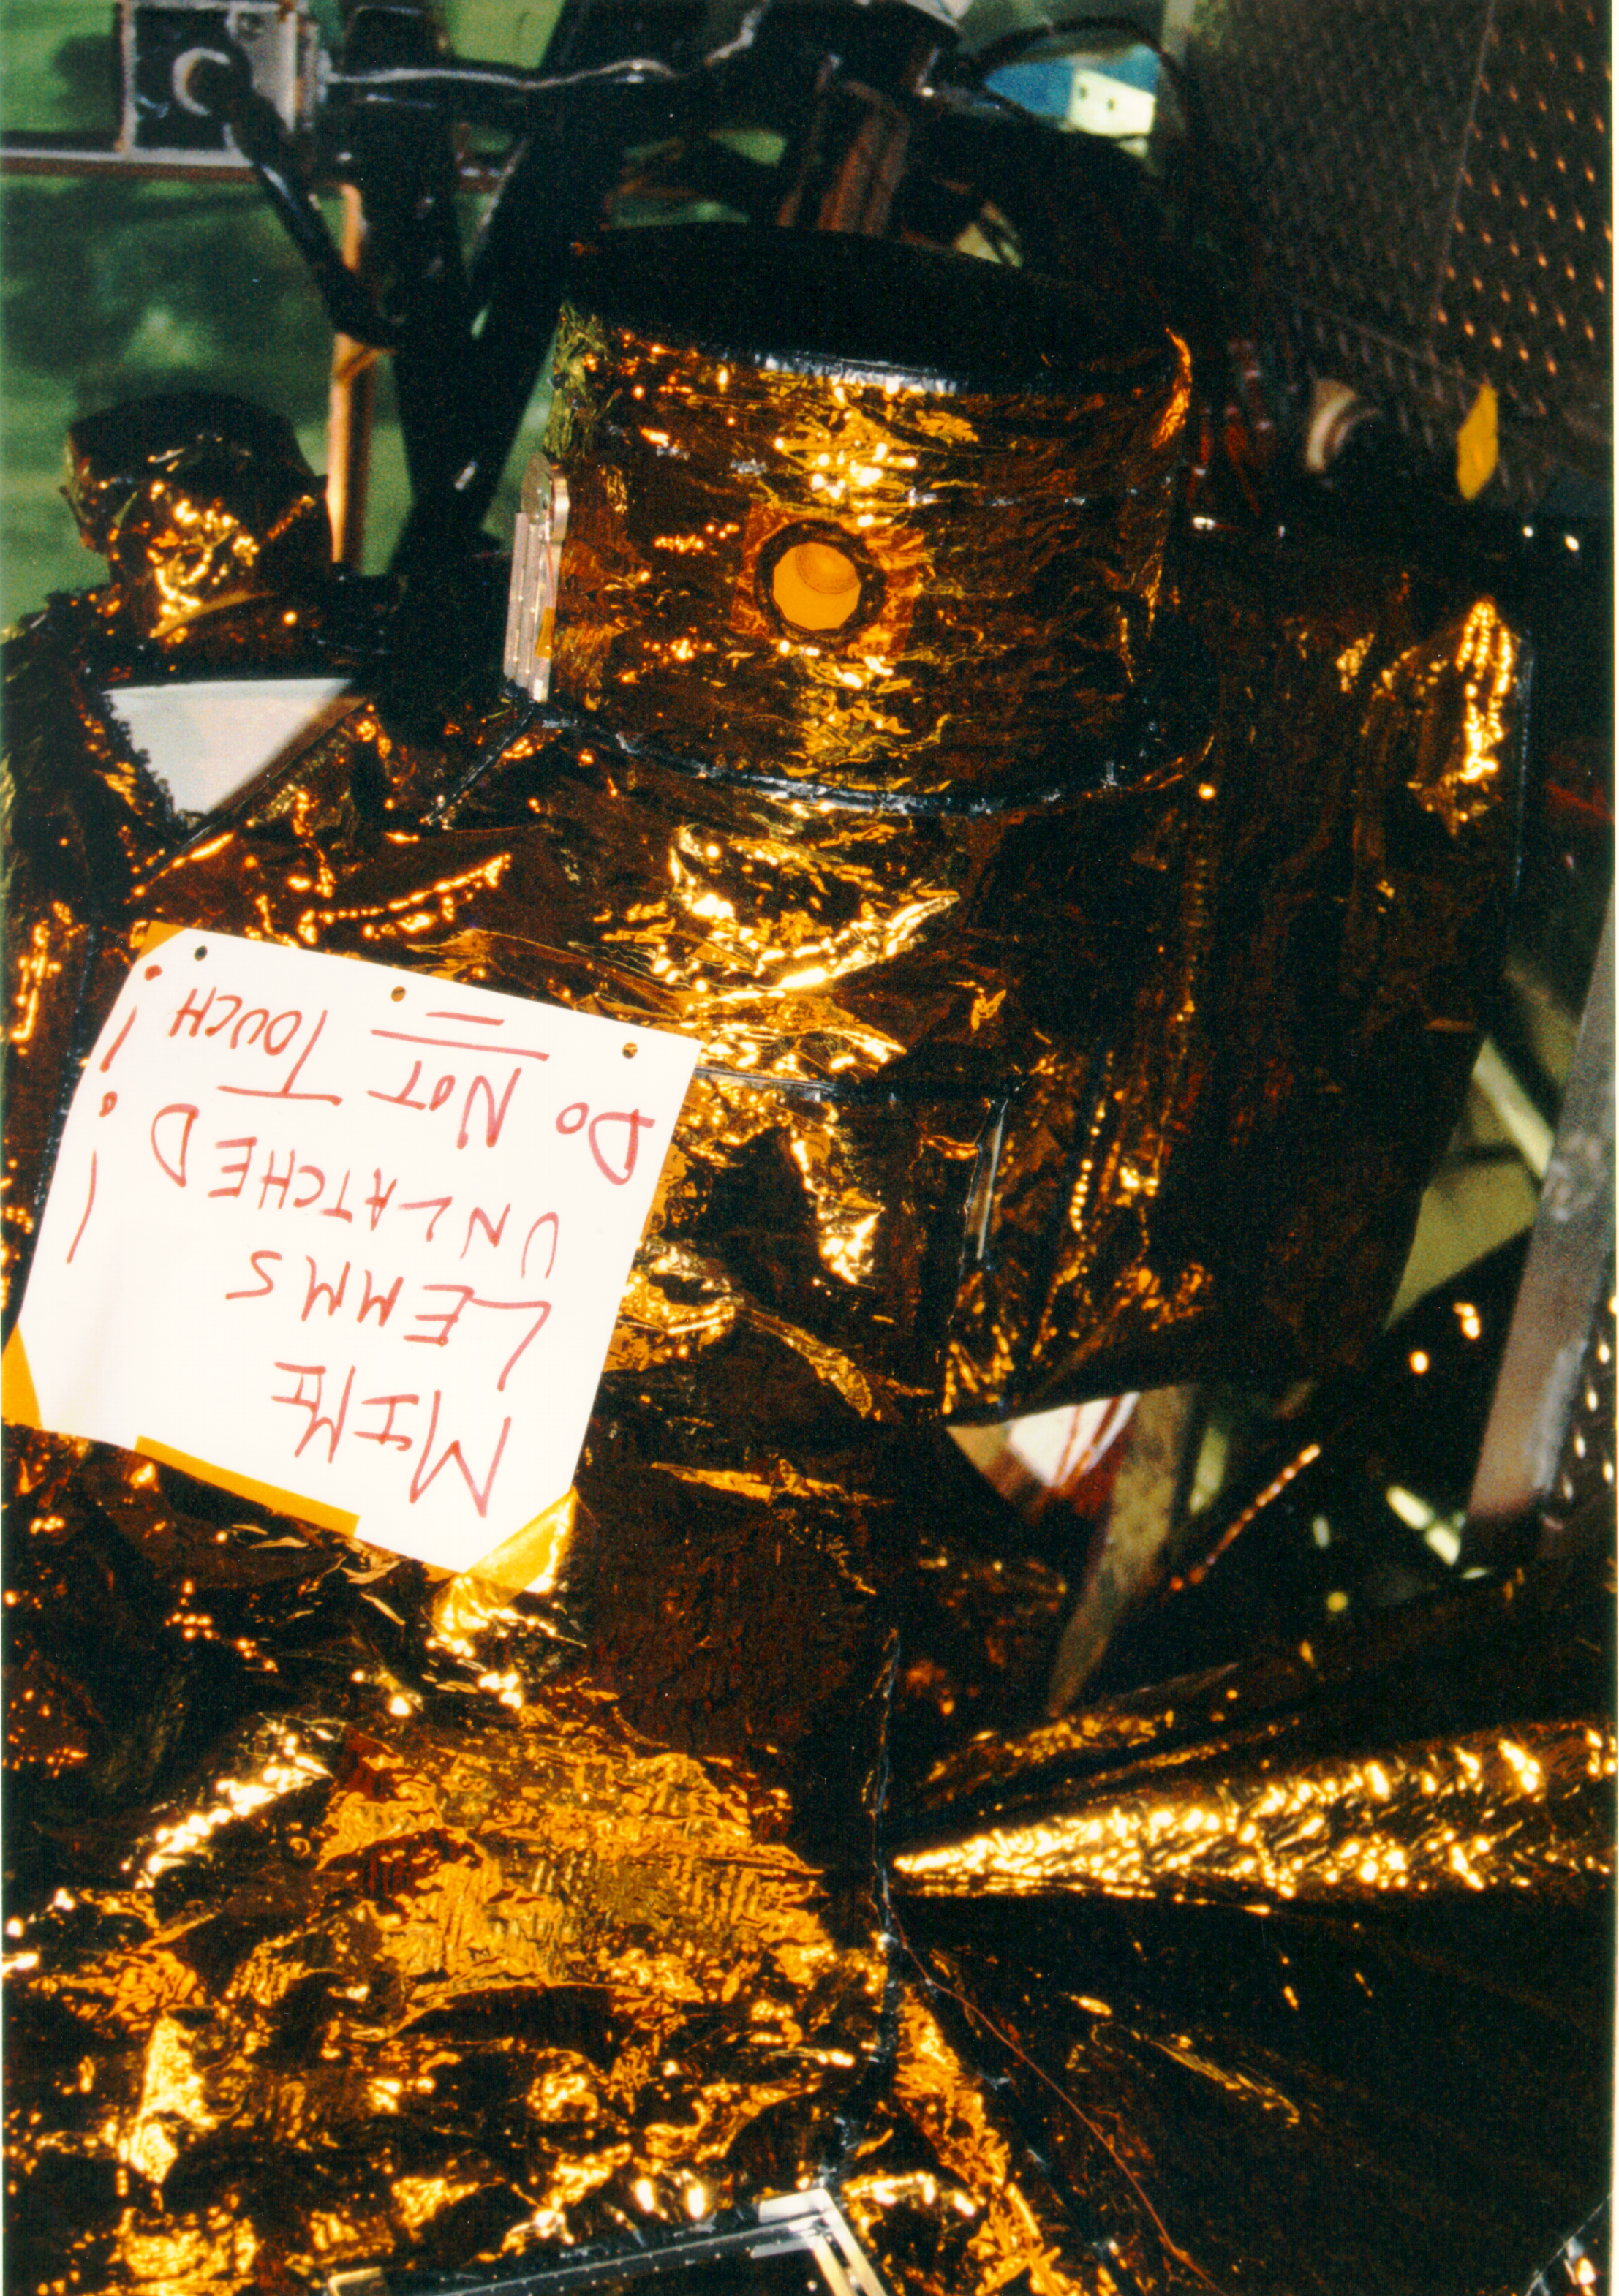 Color image of spacecraft with a note on it that says "MIMI LEMMS unlatched! Do not touch!"